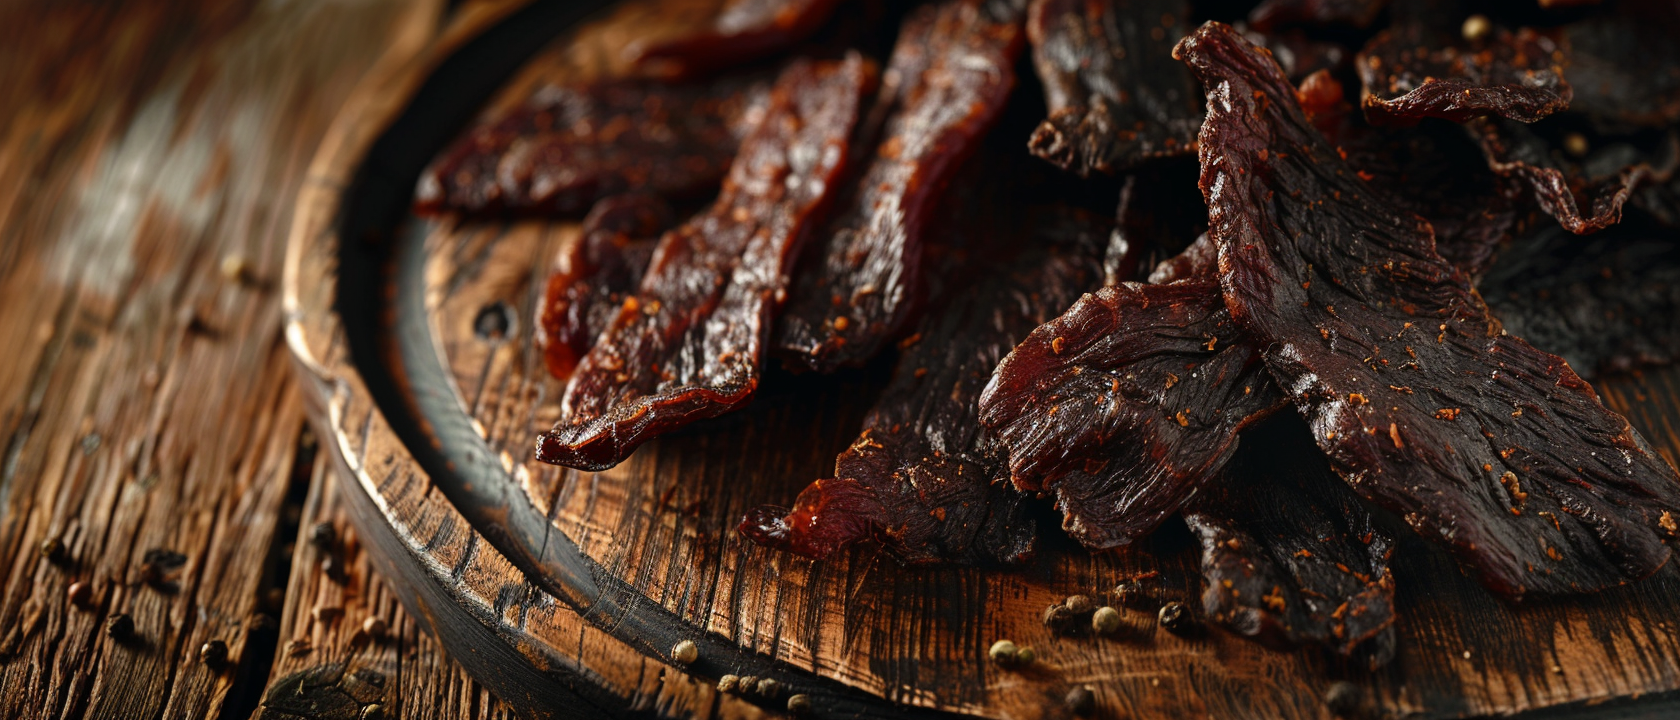 How to Make Ground Beef Jerky: A Step-by-Step Guide